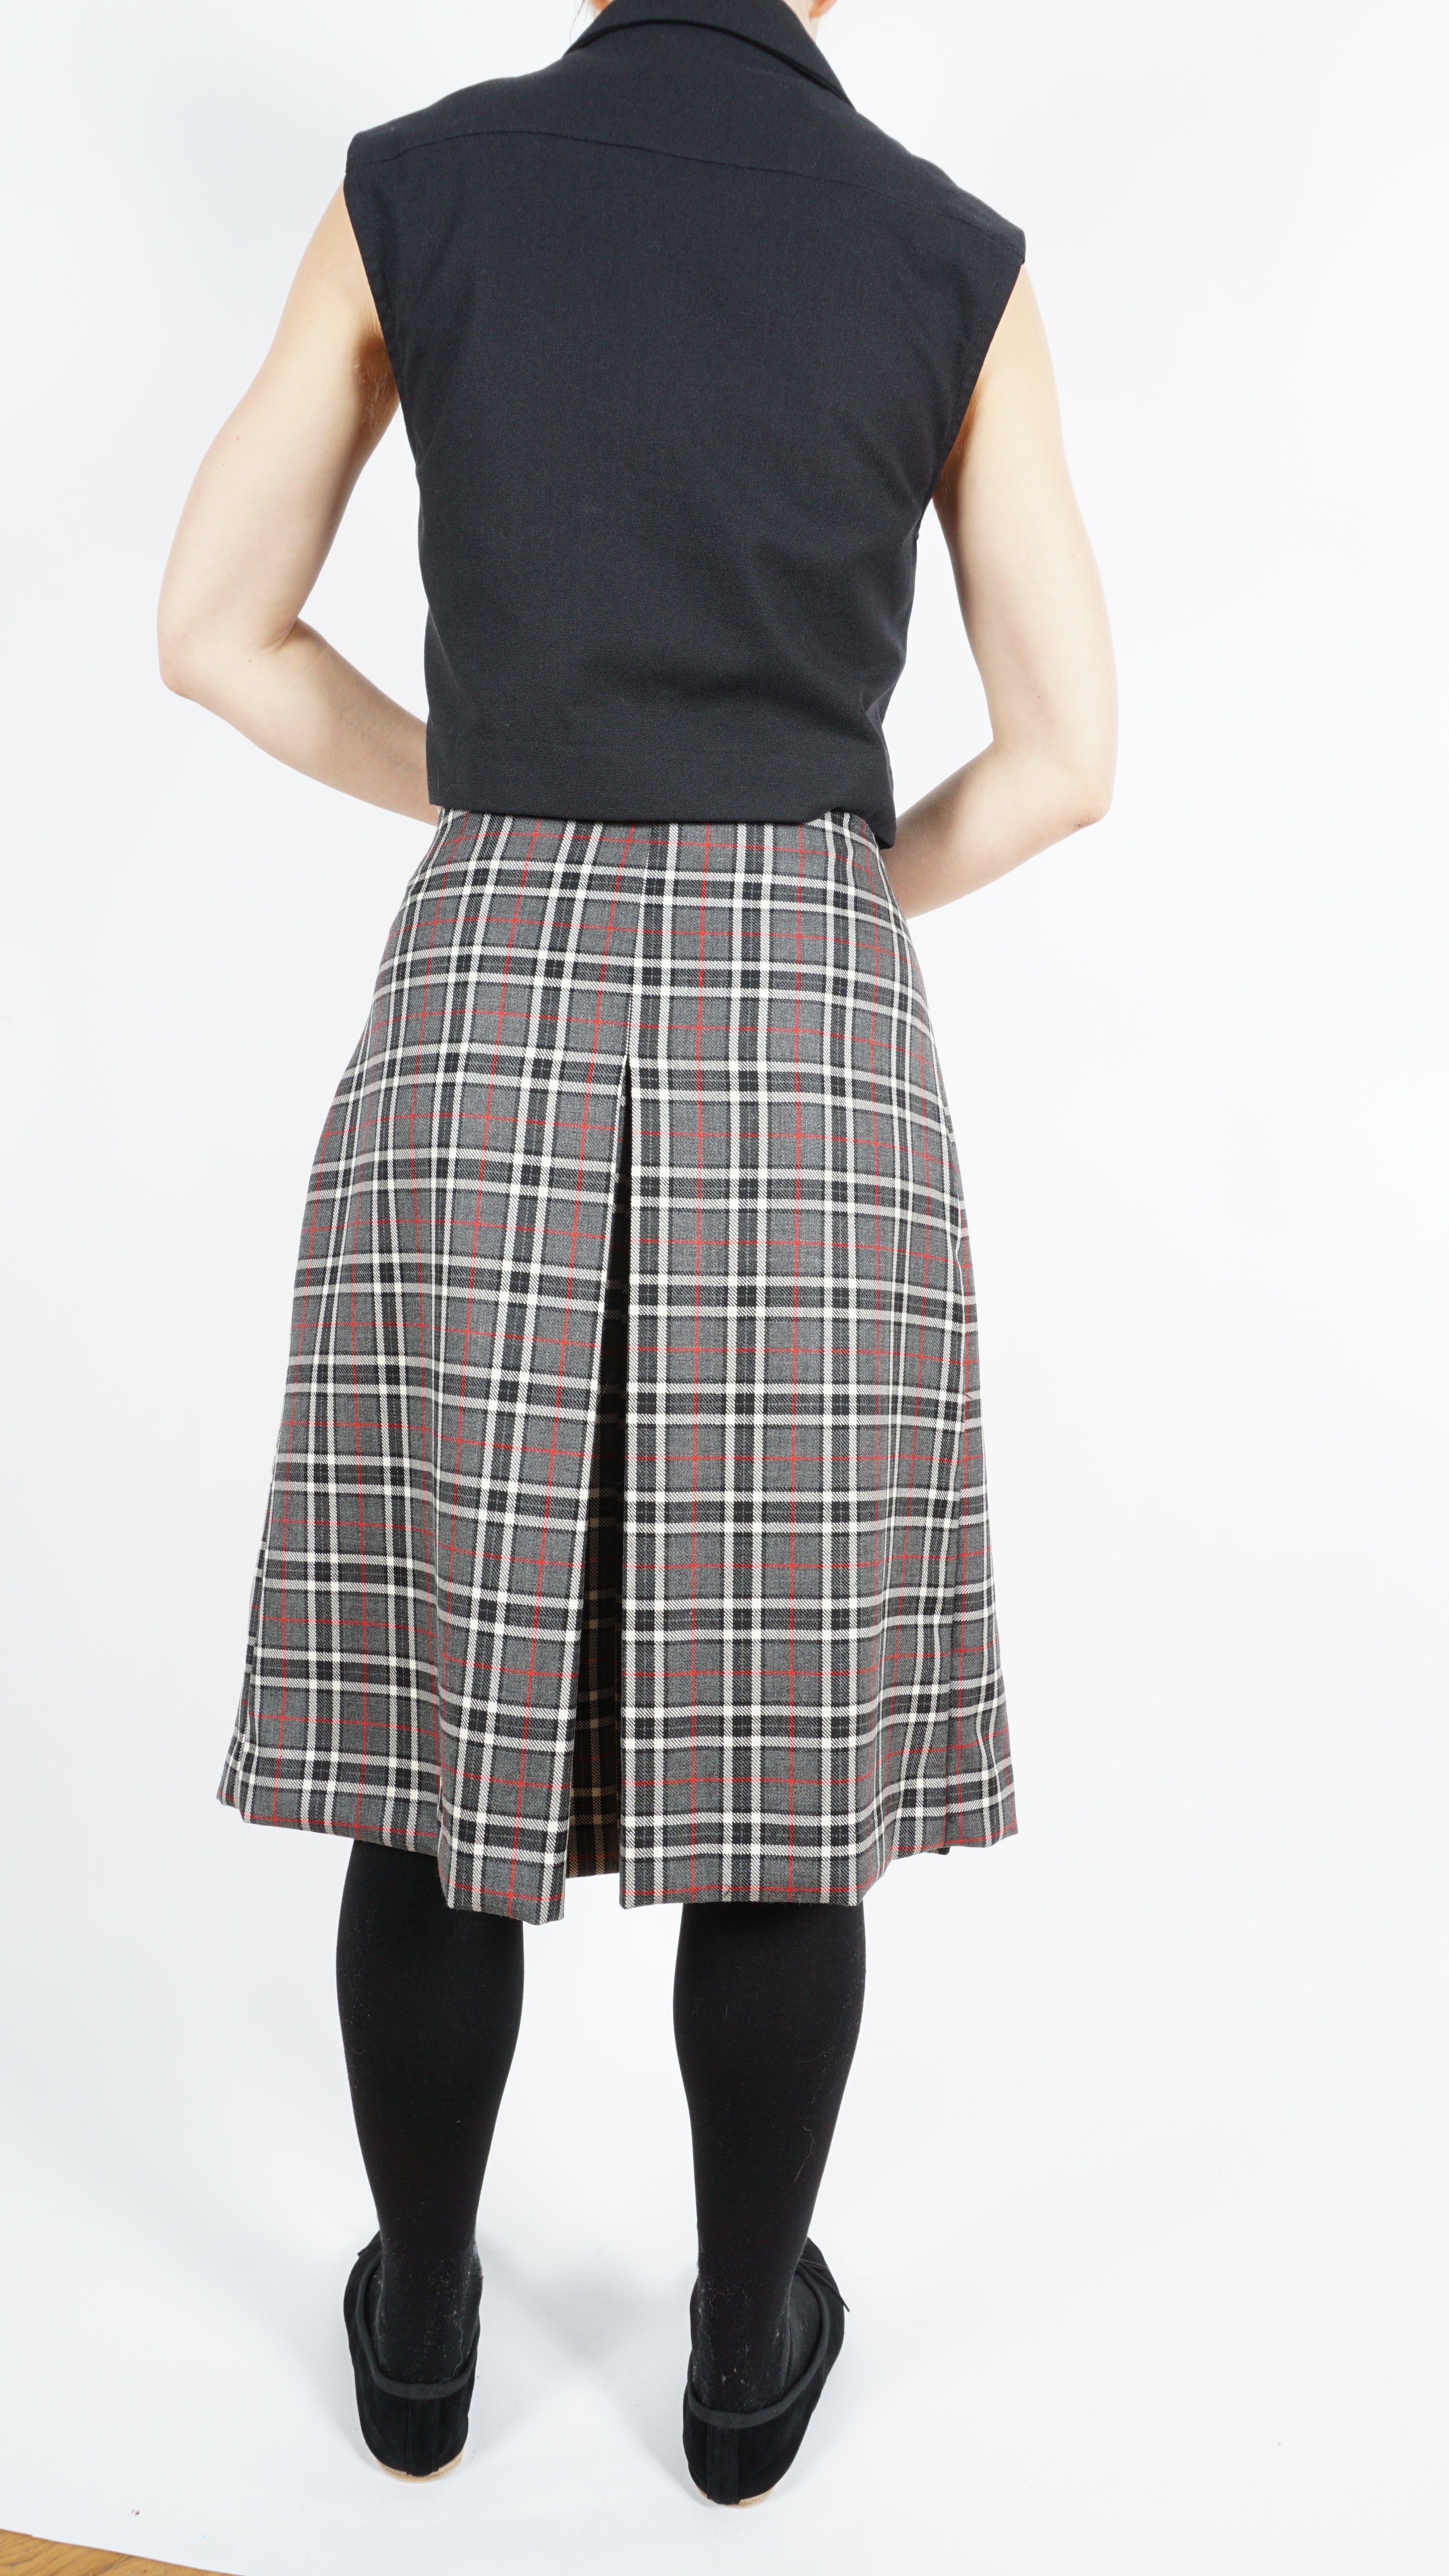 Checkered skirt by Sabine Poupinel